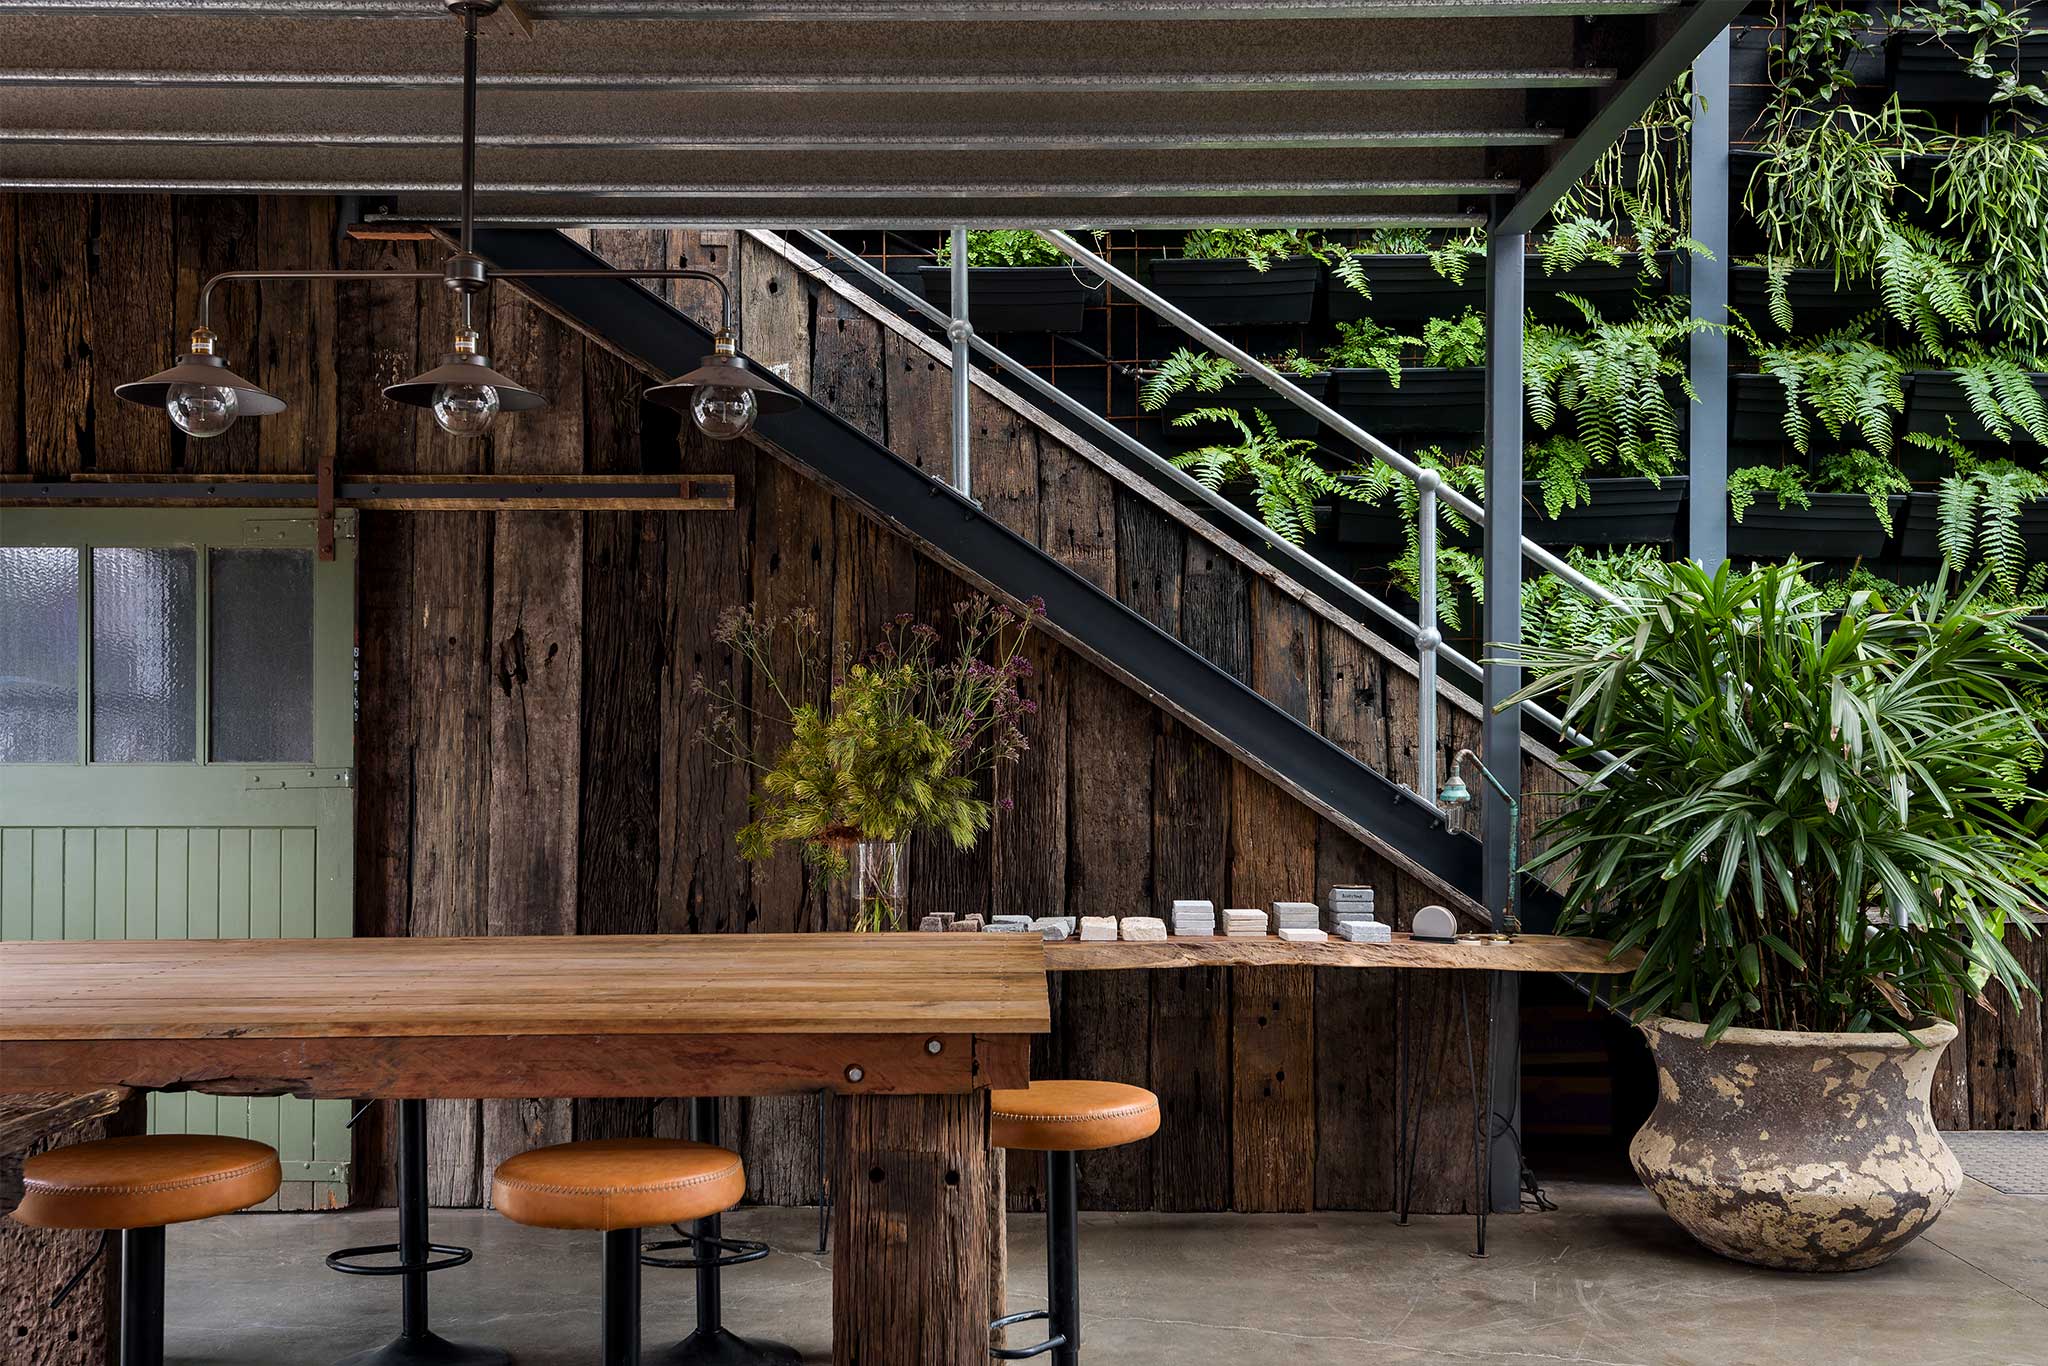 Commercial Interior Fitout Central Coast - Project "MBS Warehouse Jungle" - recycled railway sleeper-clad staircase with meeting table in foreground